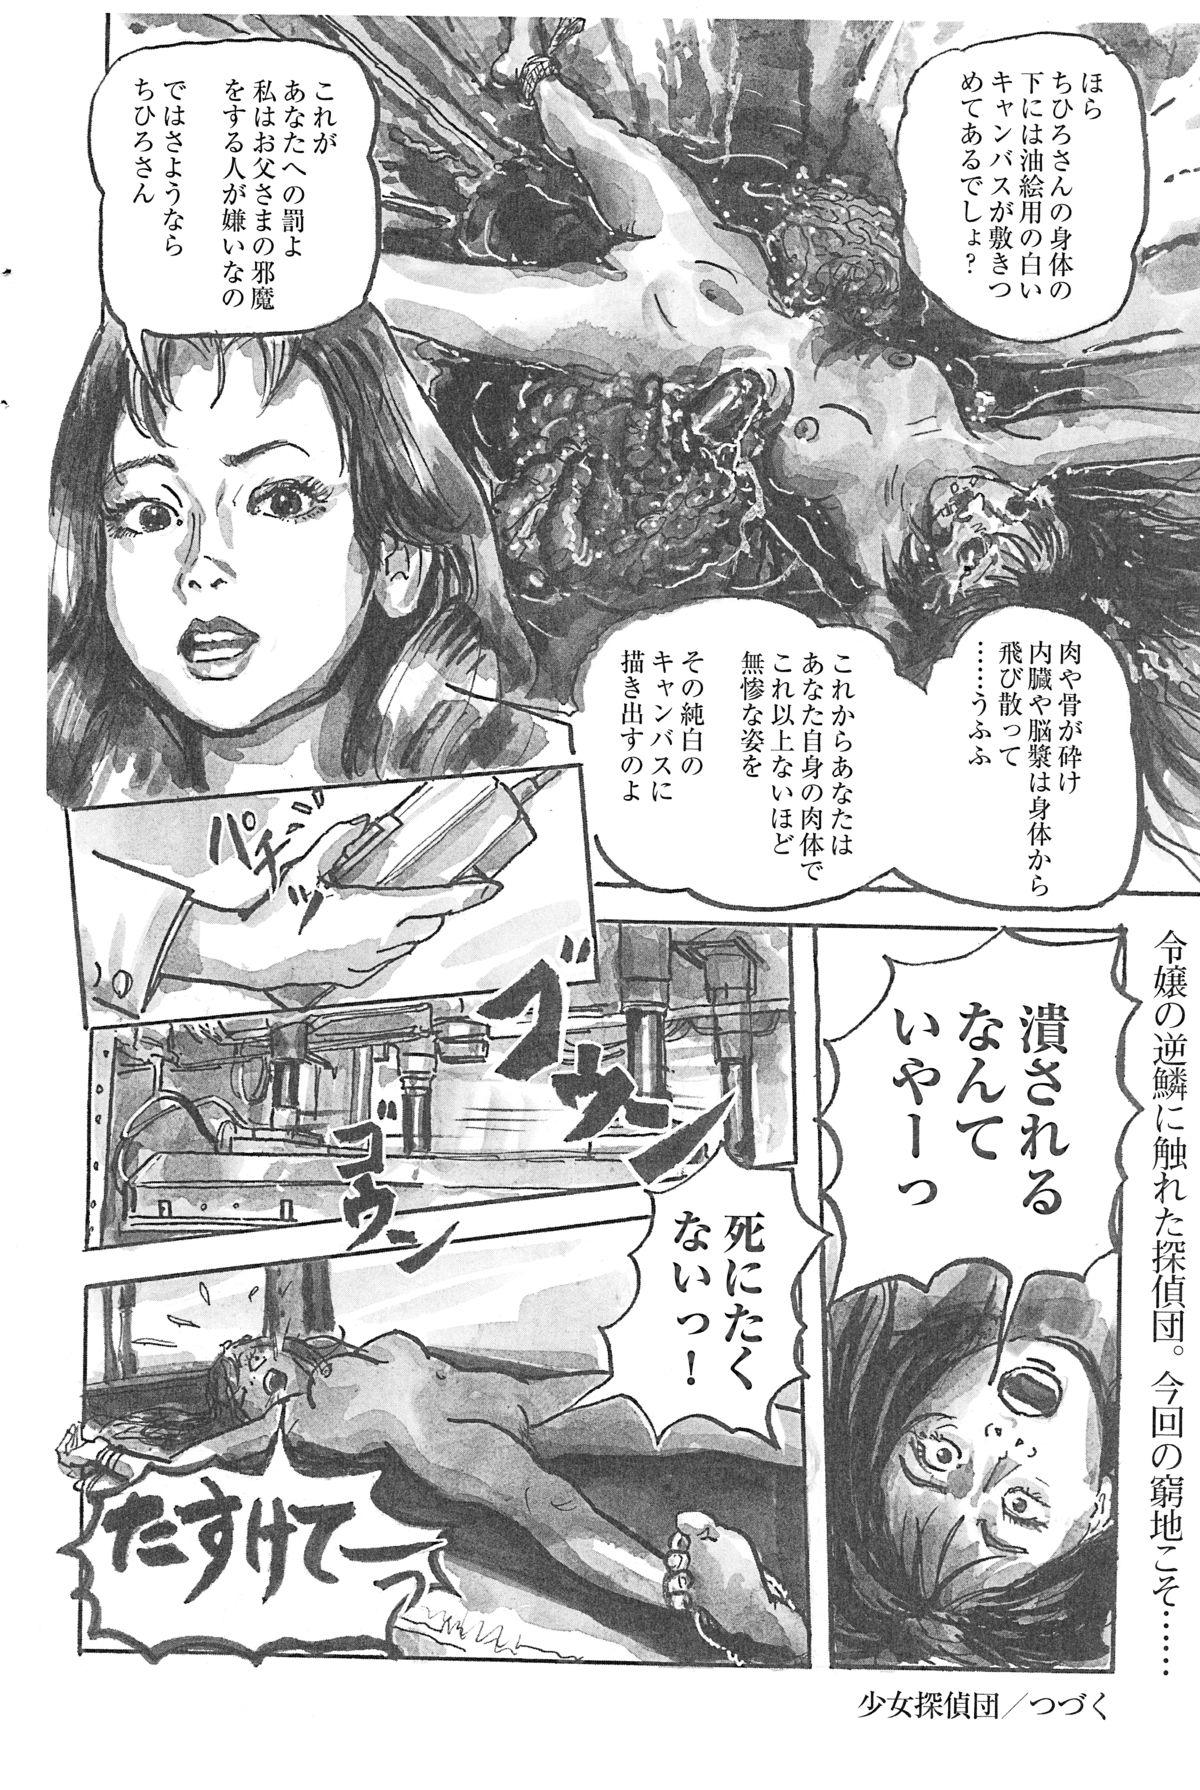 Sofa Girl Detective Team part 4 「Dream Girl」 Butts - Page 10